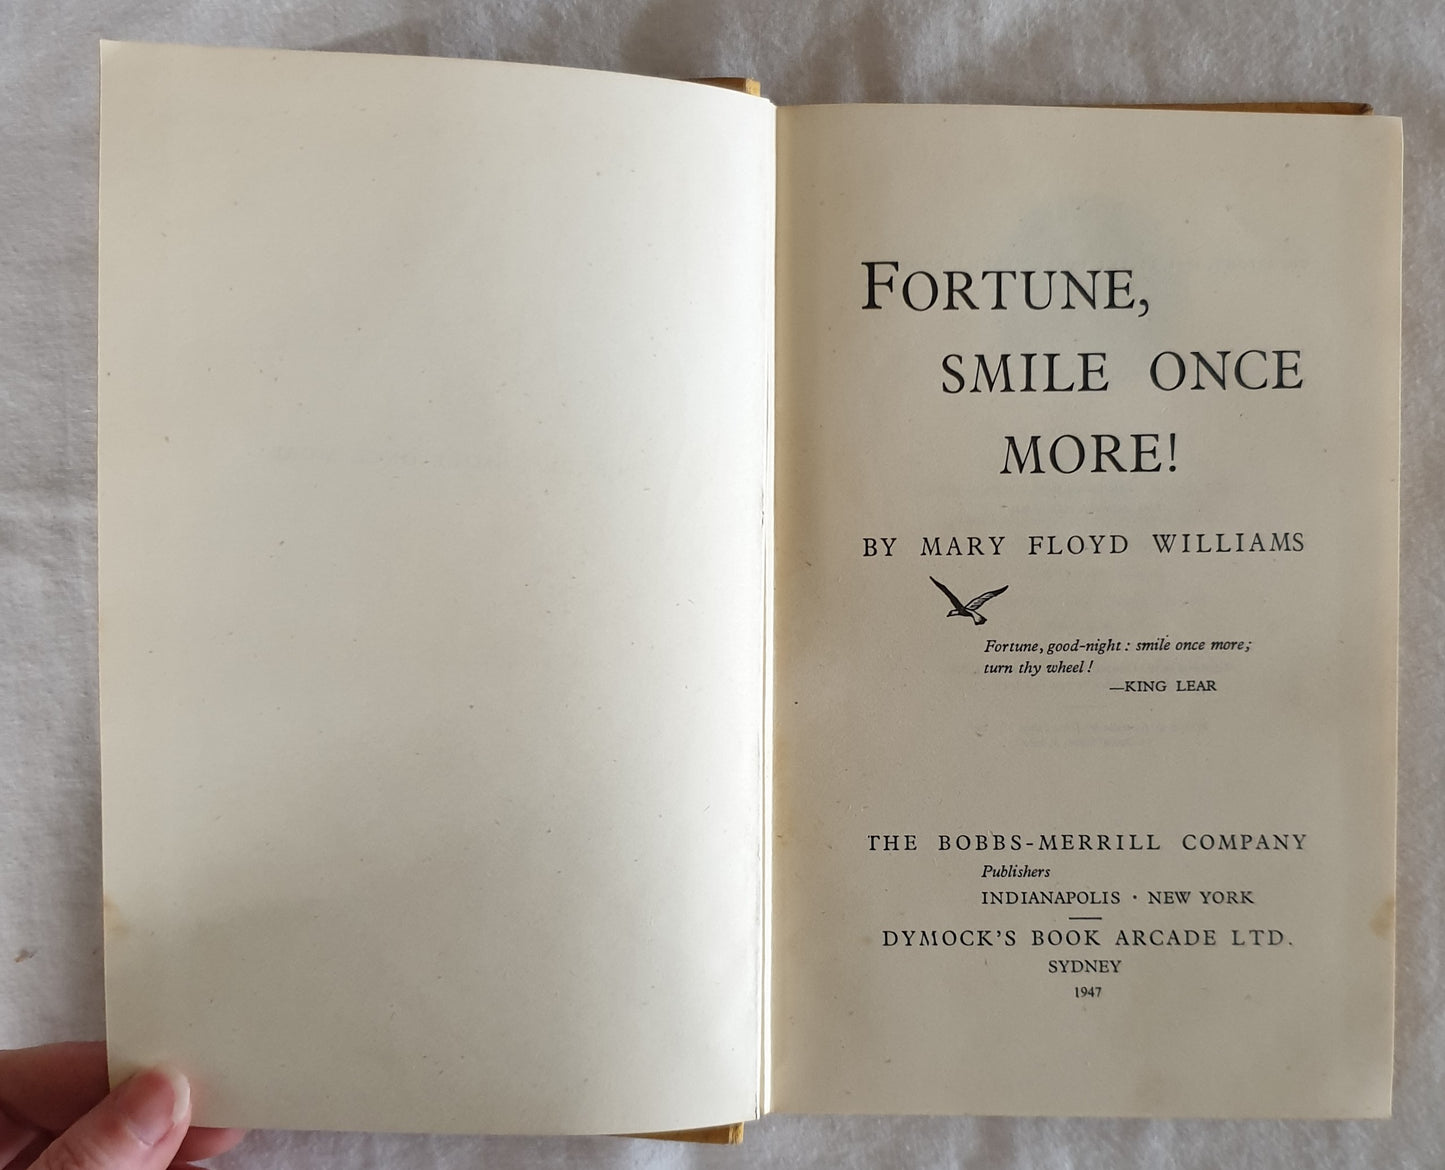 Fortune, Smile Once More! by Mary Floyd Williams